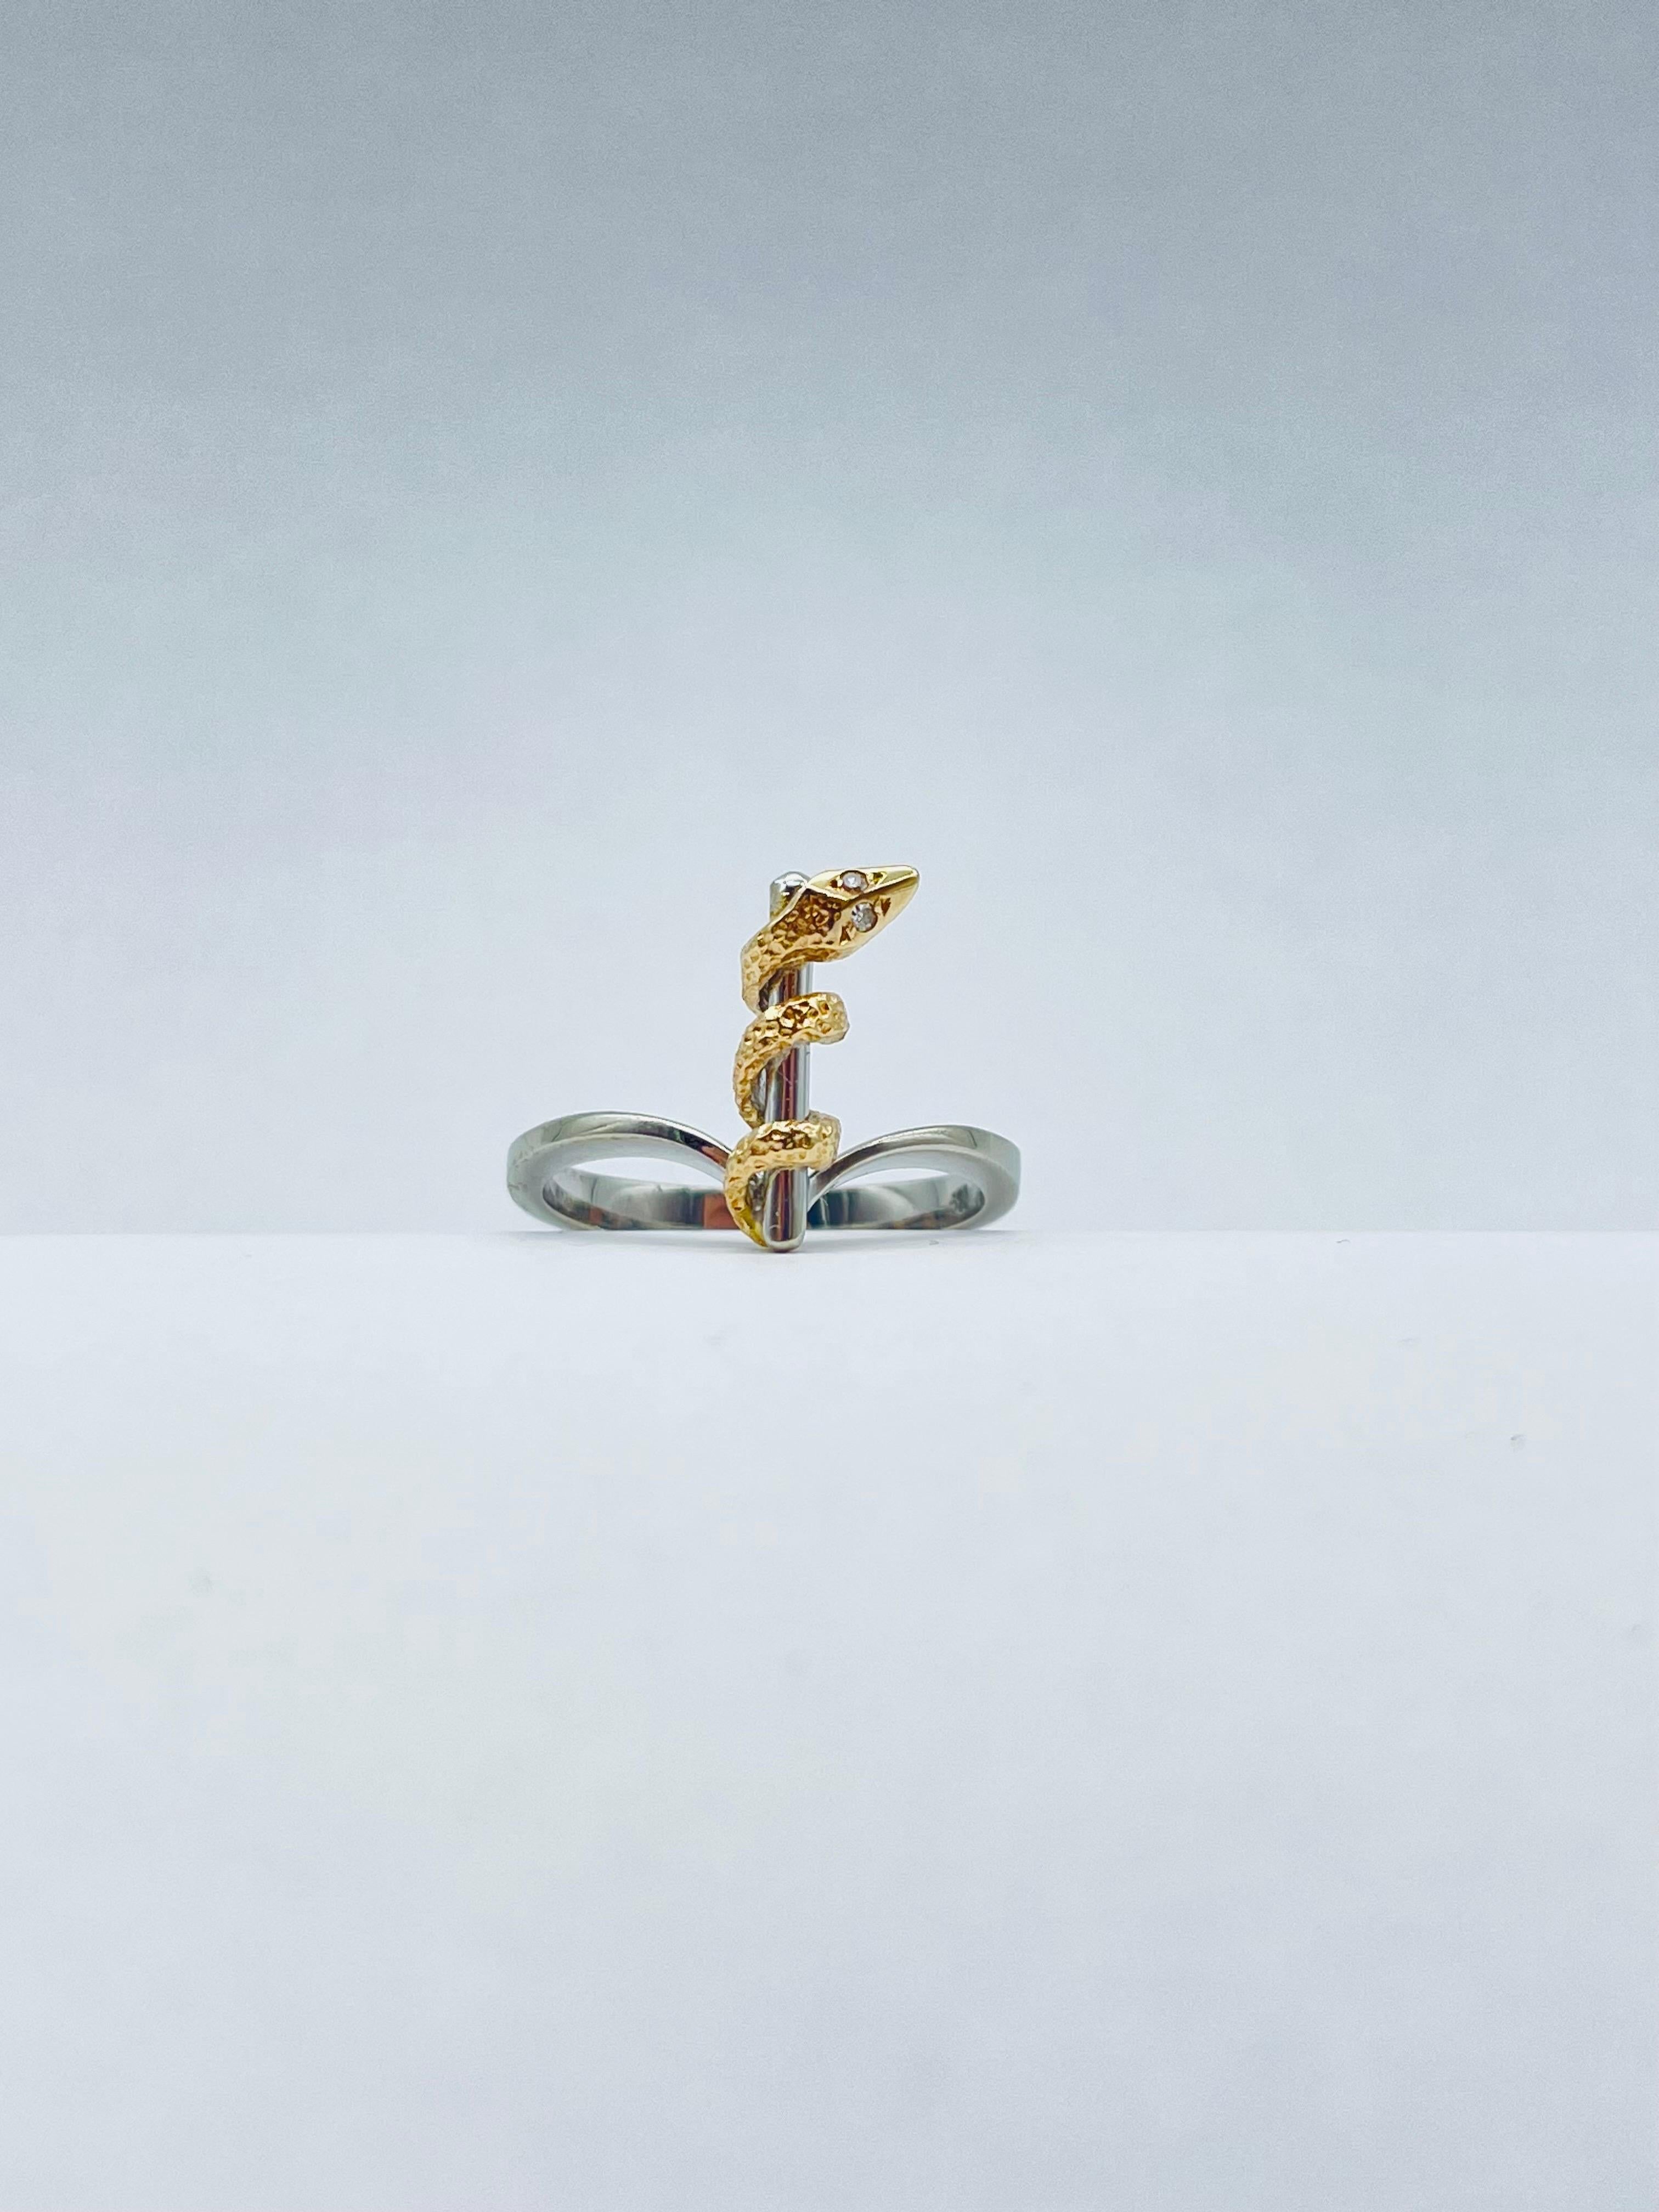 Unique and Elegant Snake Bicolor Ring with Diamond Eyes White/Yellow Gold 14k For Sale 2